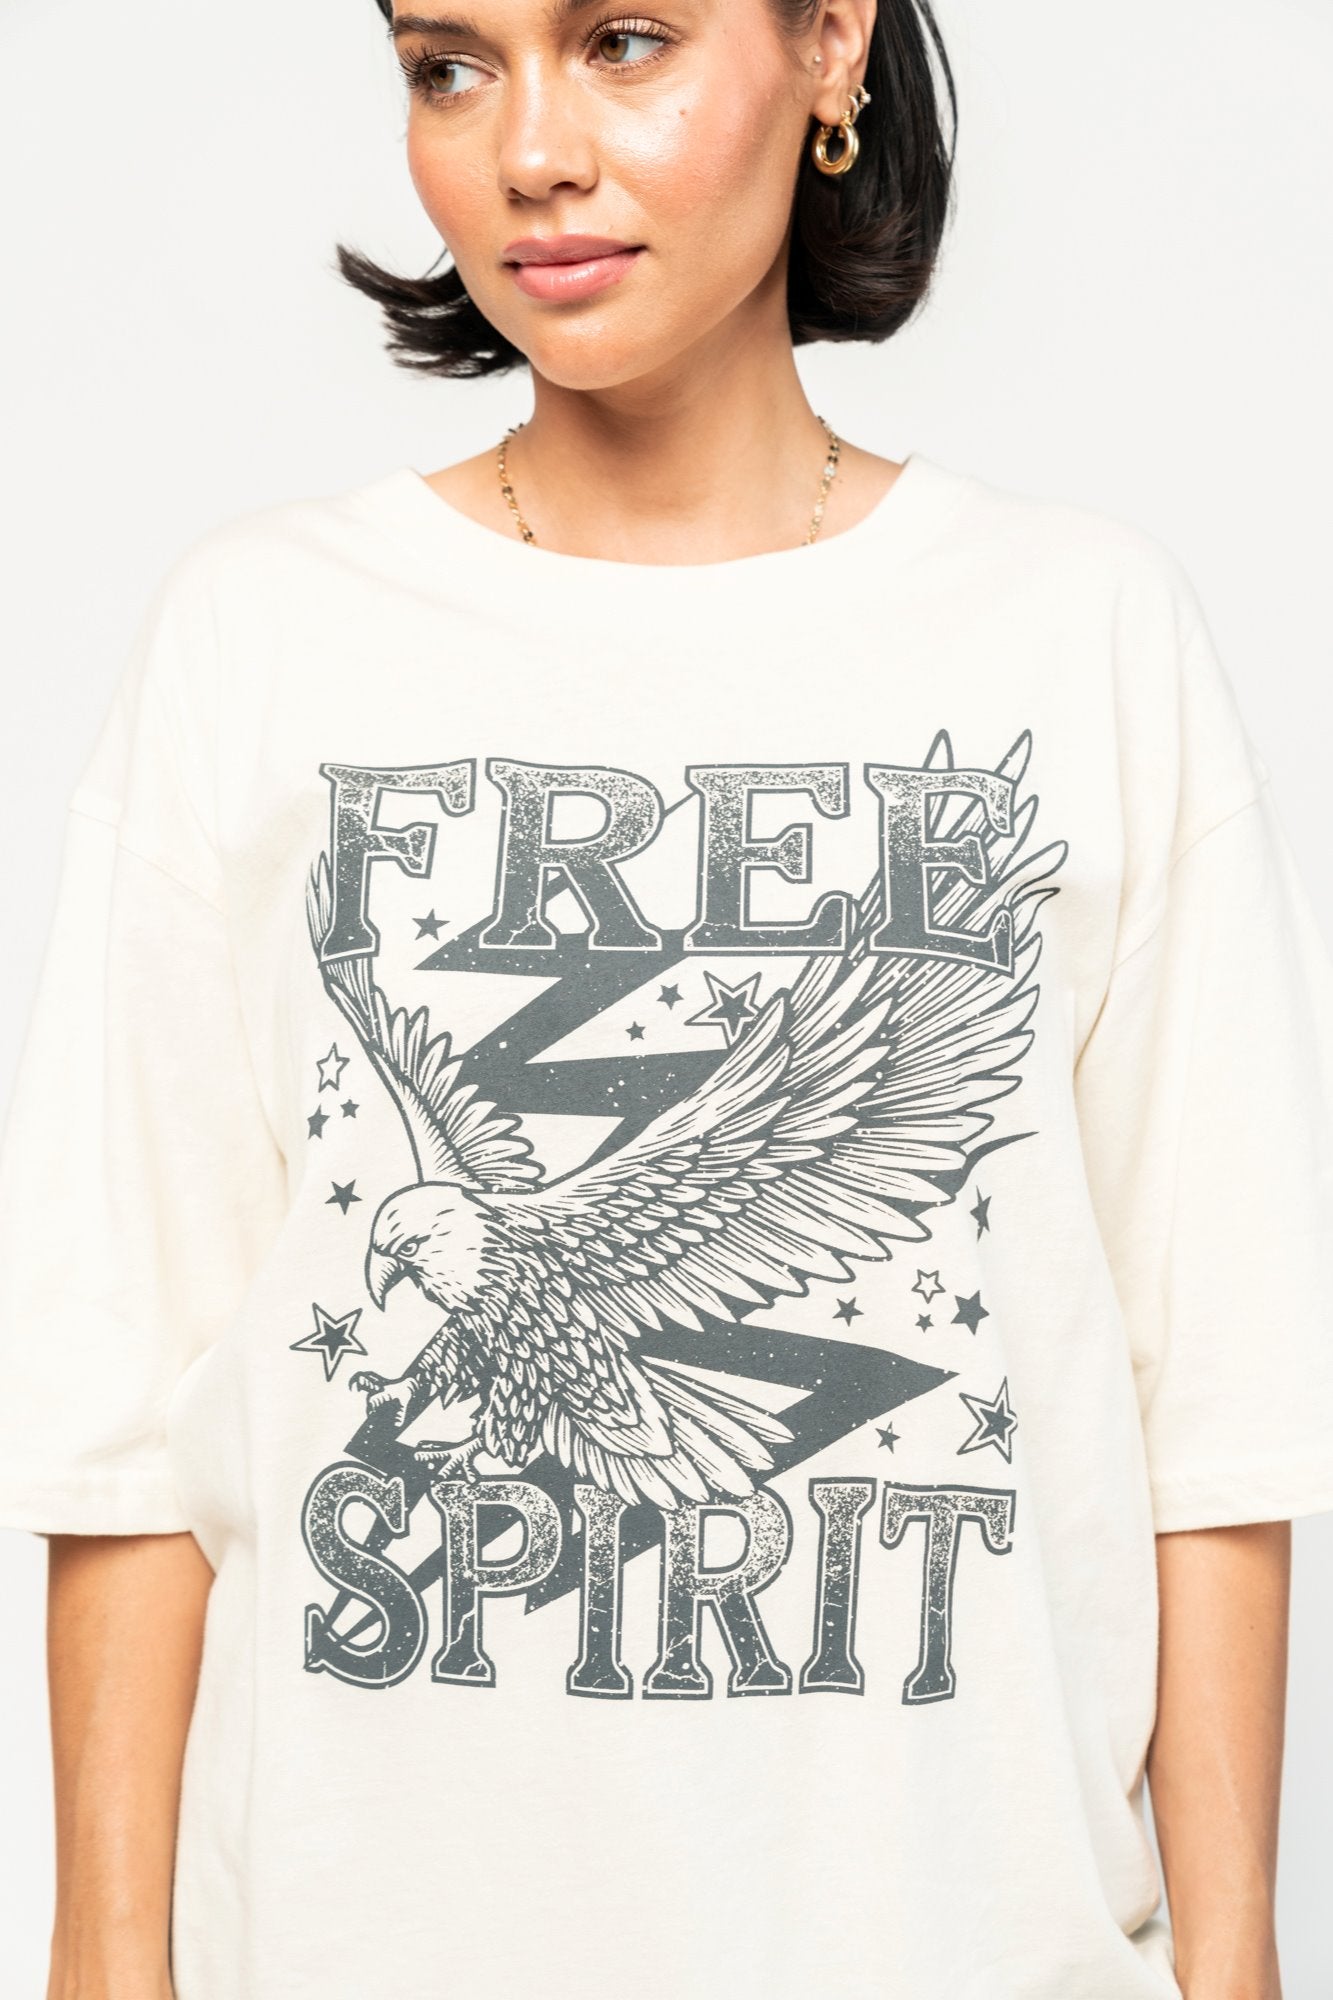 Free Spirit Graphic Tee (Small-XL) Holley Girl 